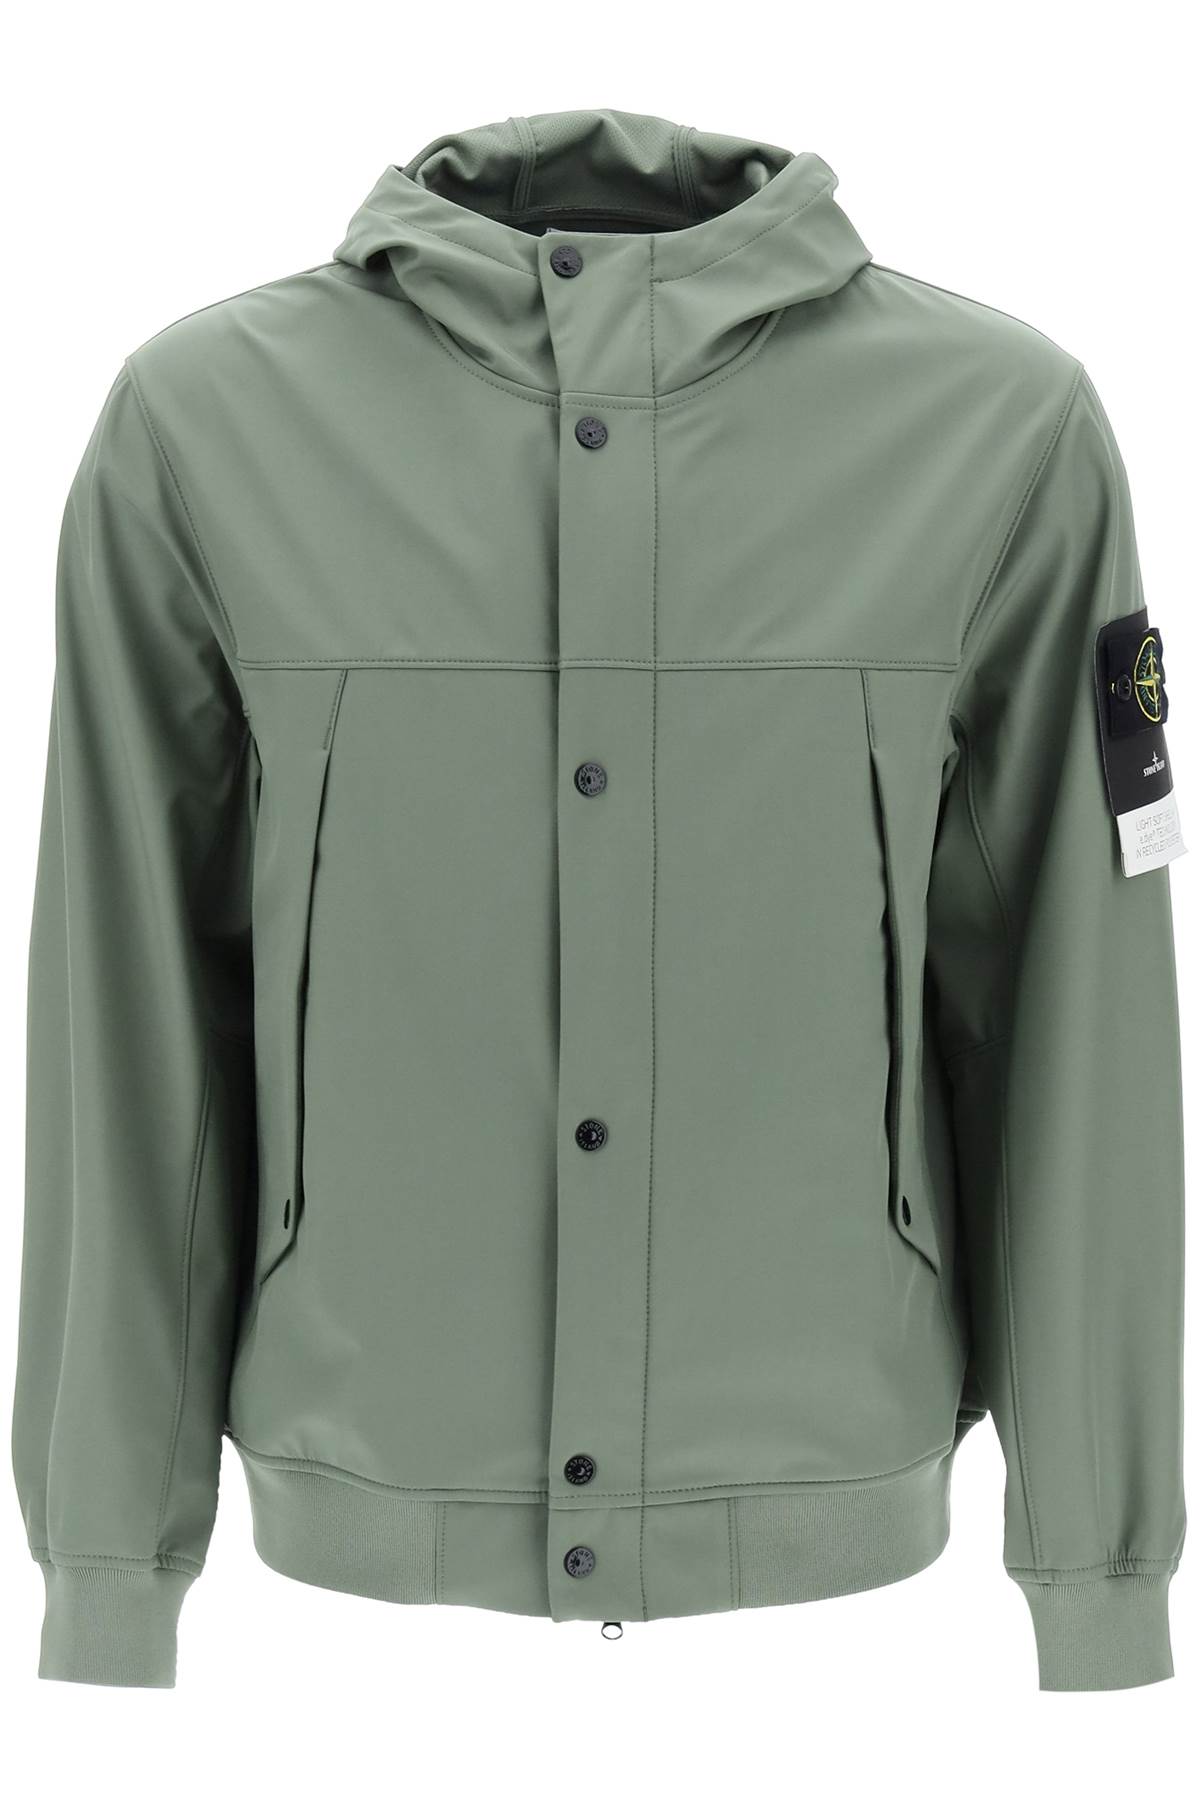 Stone Island Light Soft Shell-r Hooded Jacket In Green